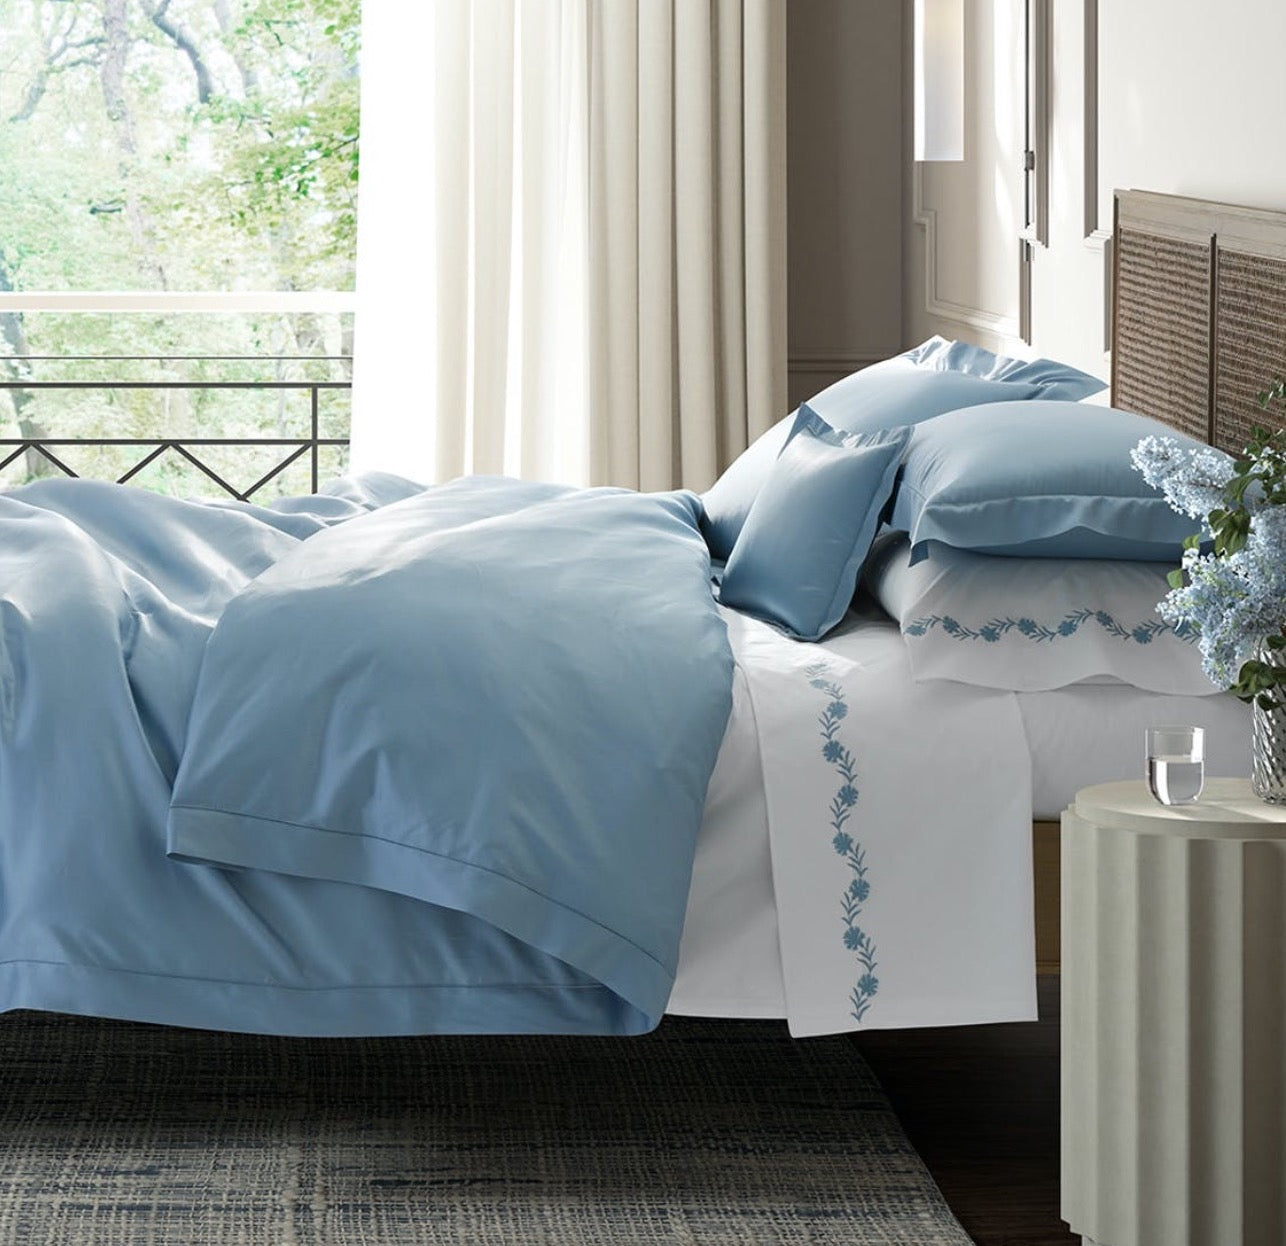 Matouk Bedding - Talita Hemstitch Giza Cotton - Bed Linens and Sheets at Fig Linens and Home